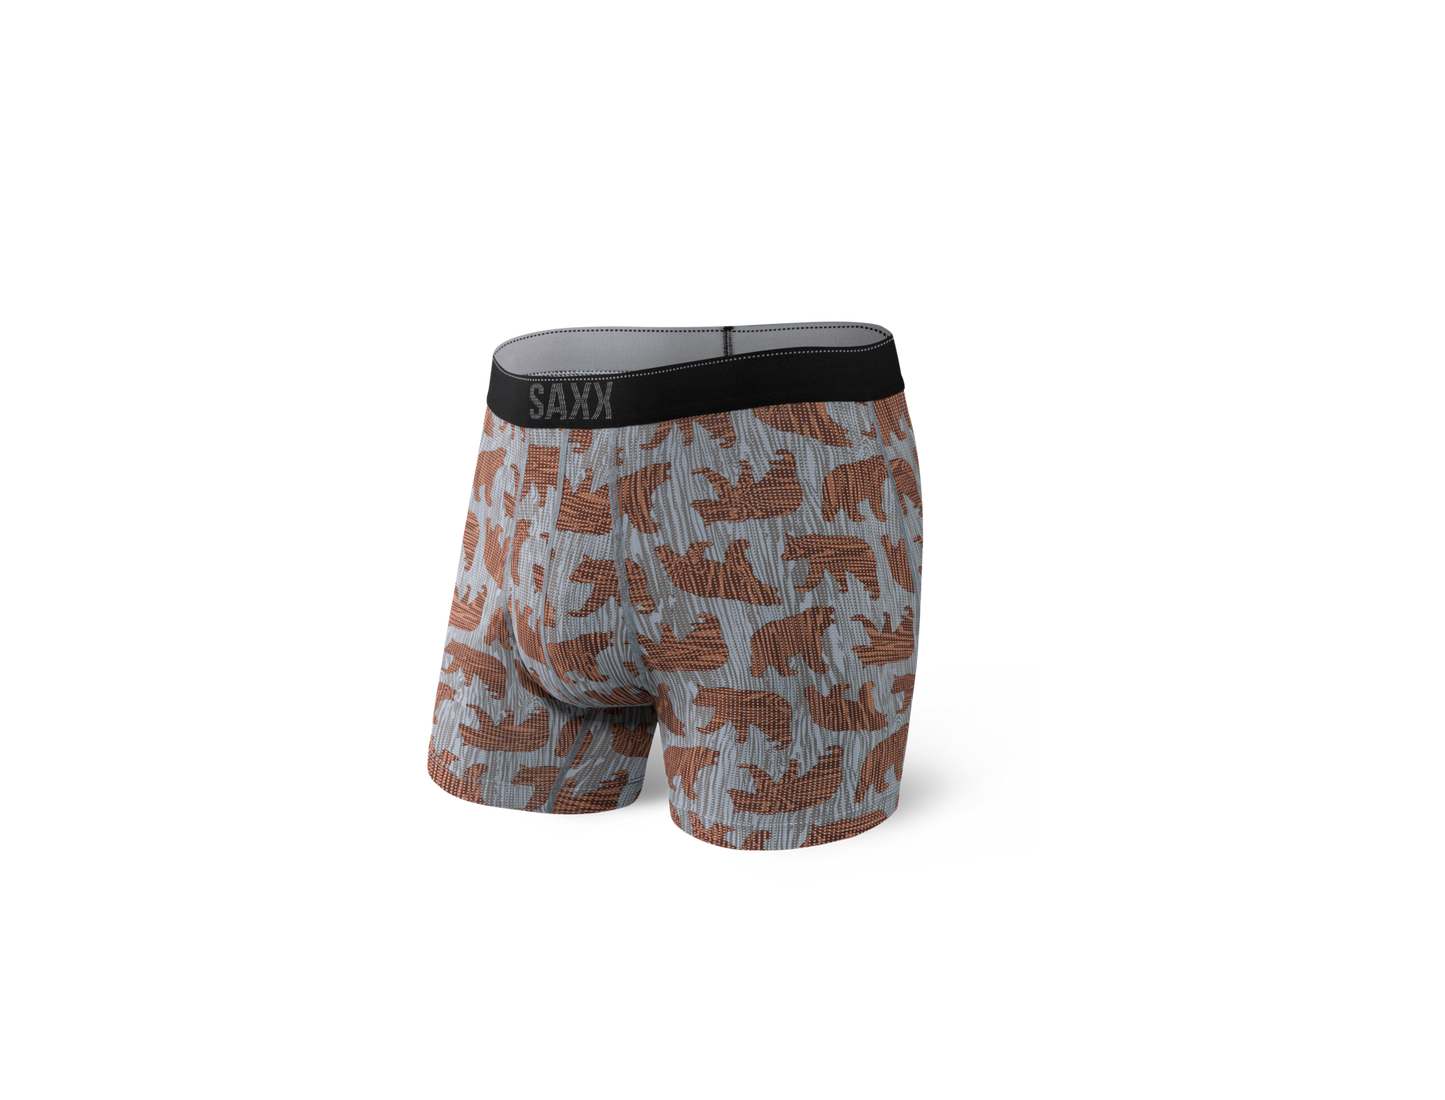 Quest Boxer Brief Grey Grizzly